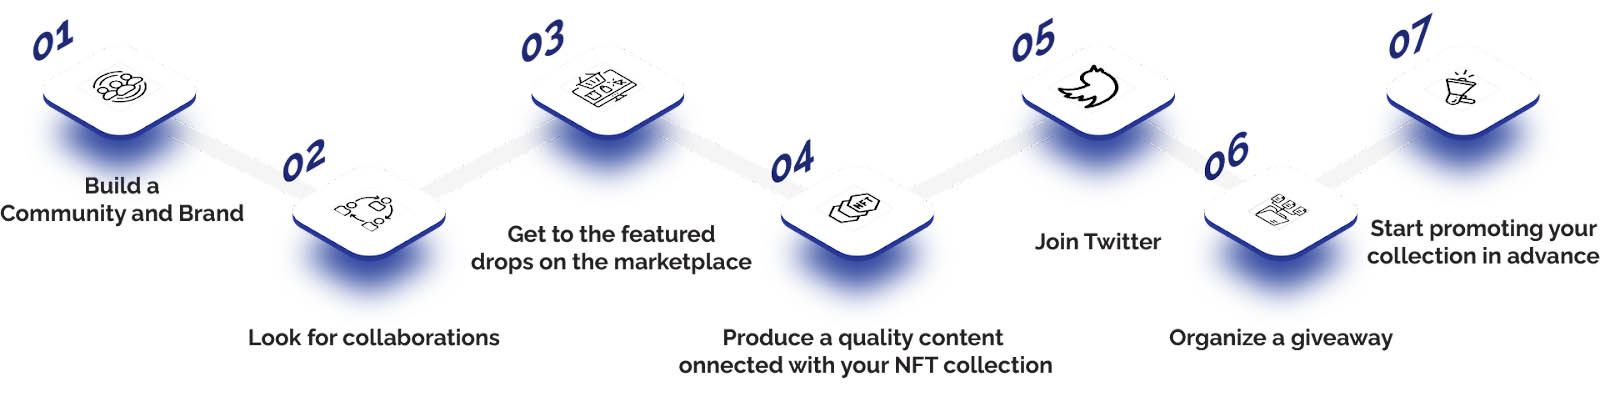 Free ways to promote an NFT collection